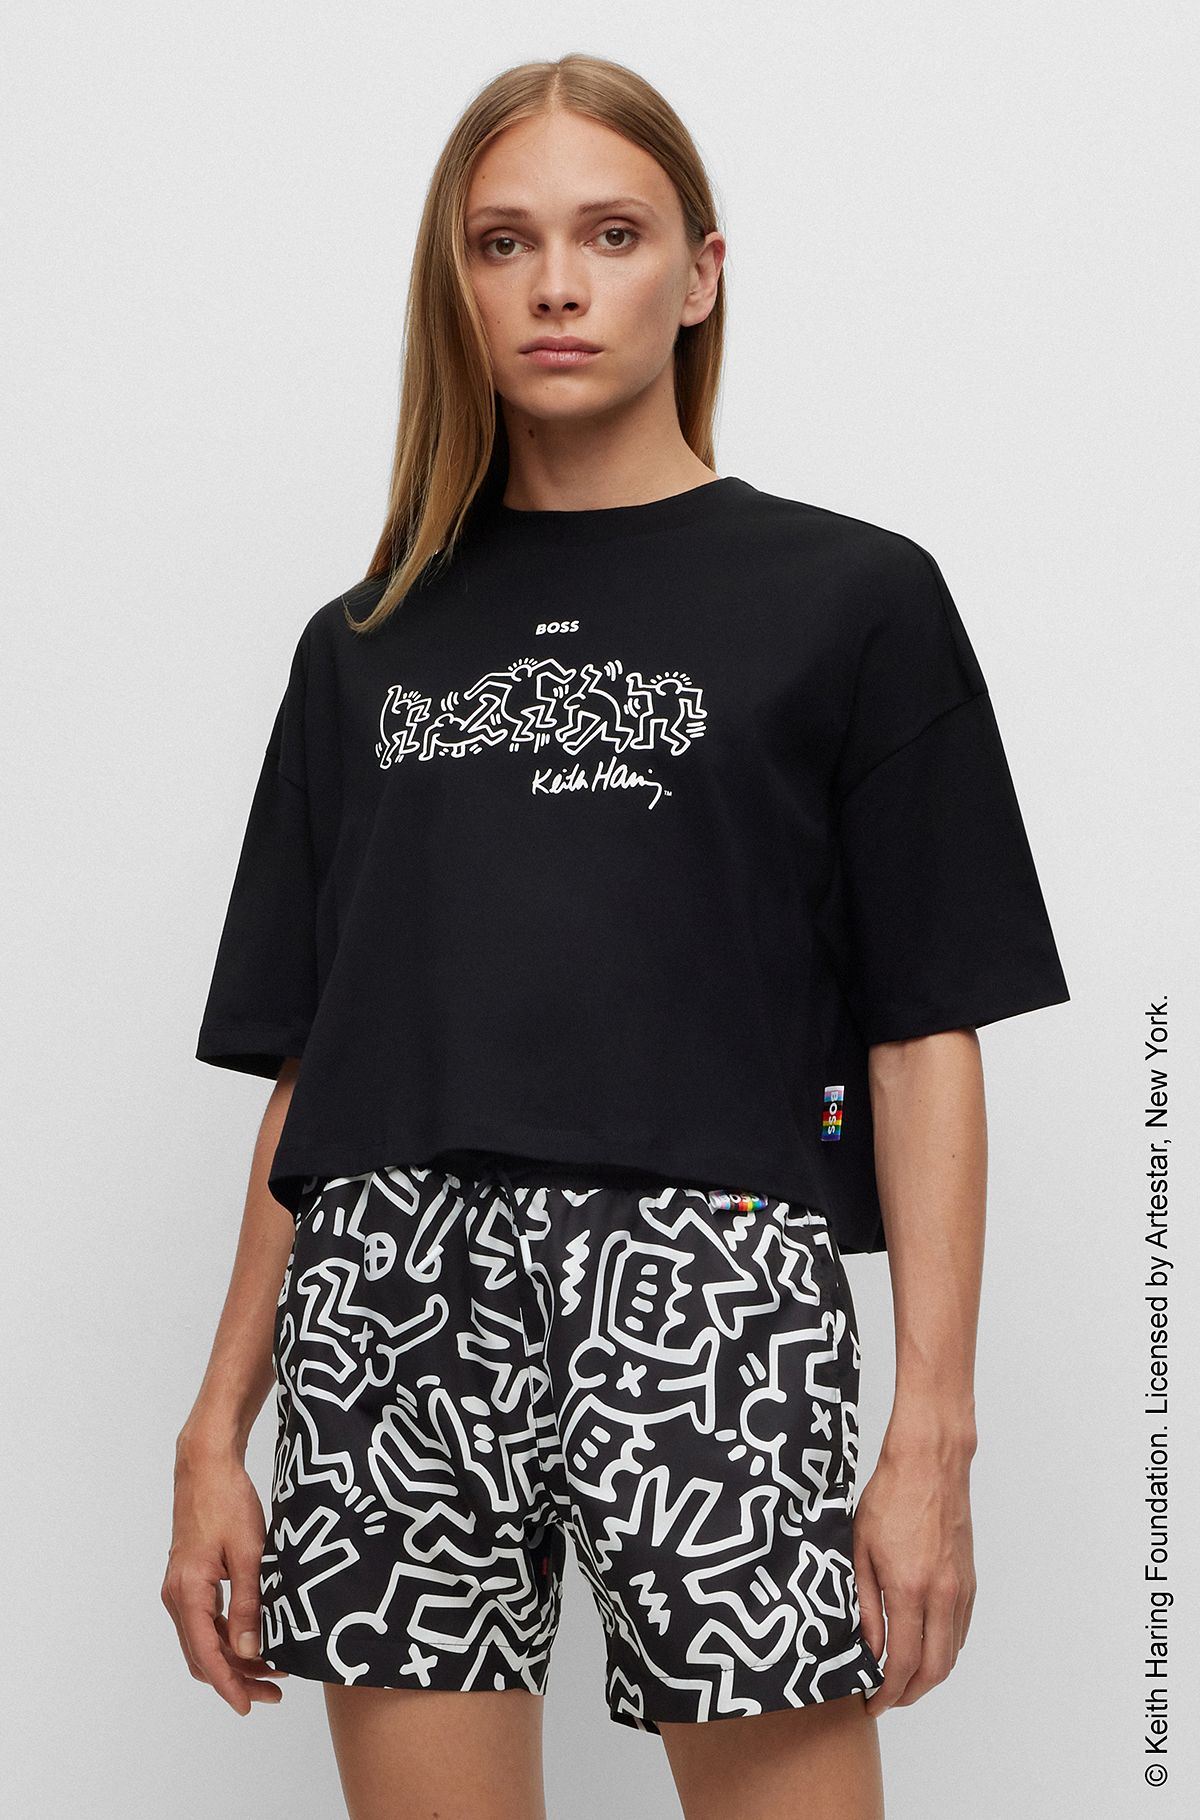 BOSS x Keith Haring gender-neutral cotton T-shirt with logo artwork, Black